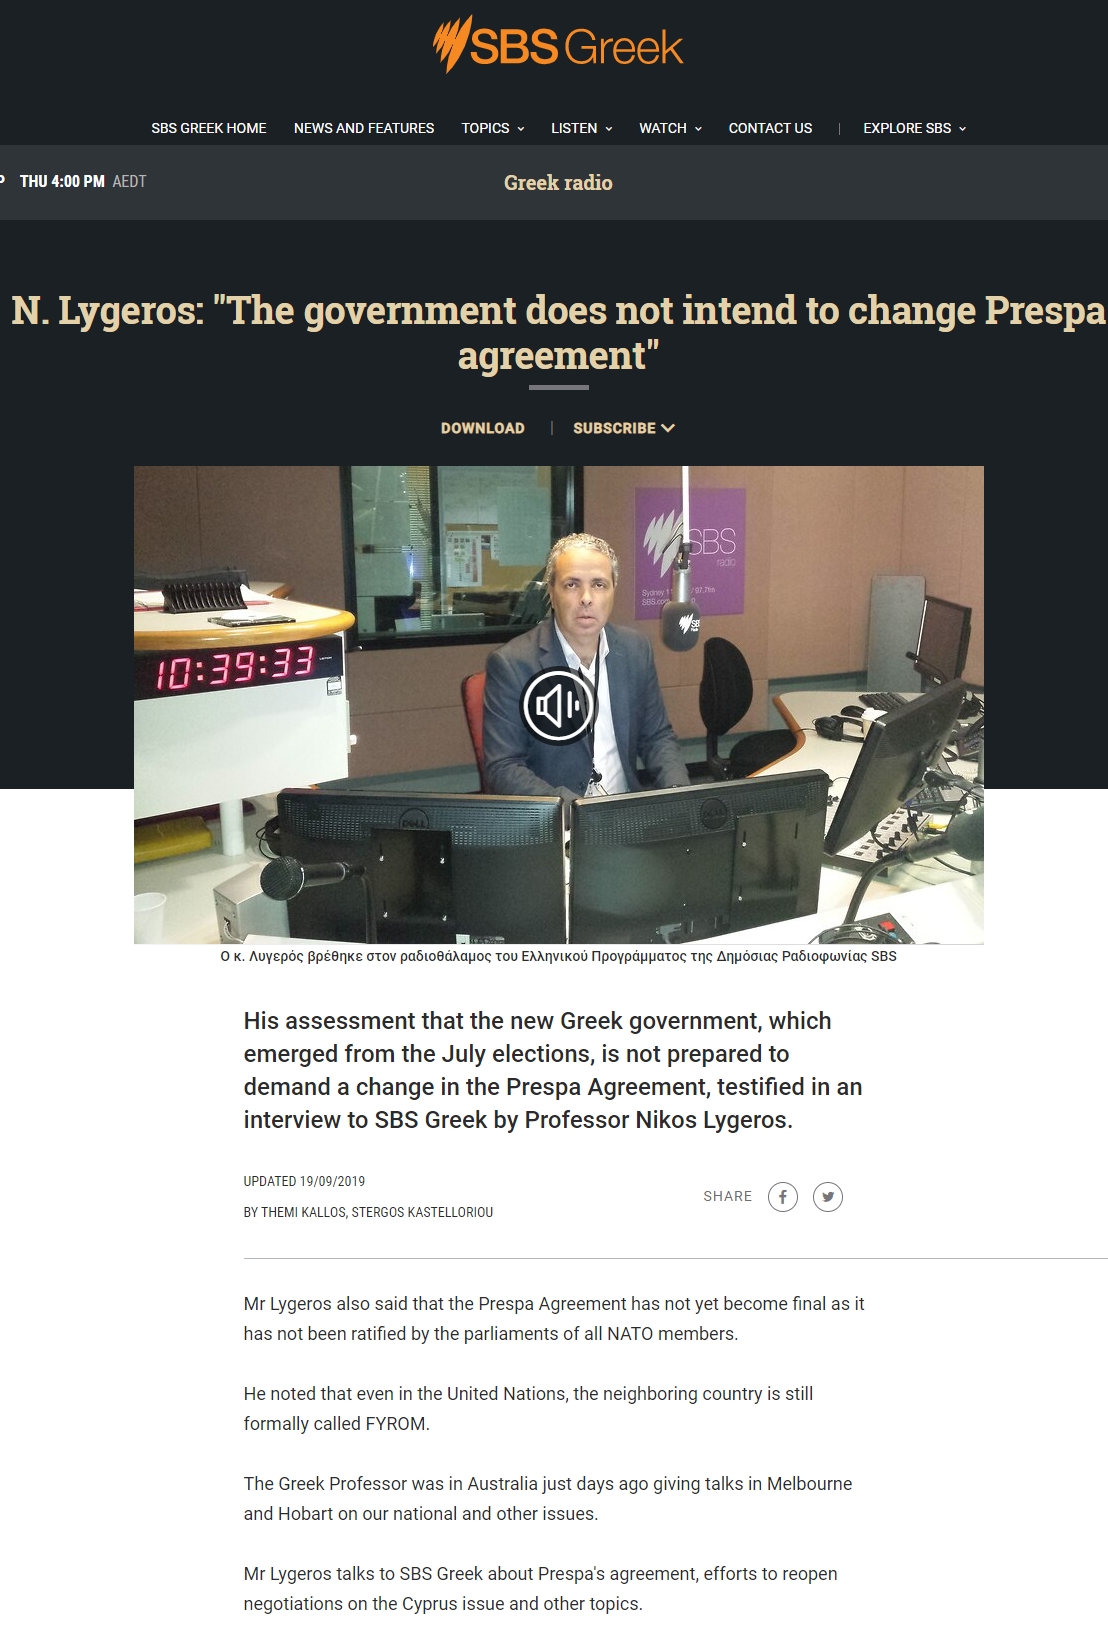 N. Lygeros The government does not intend to change Prespa agreement, www.sbs.com.au, 16/10/2019 - Publication